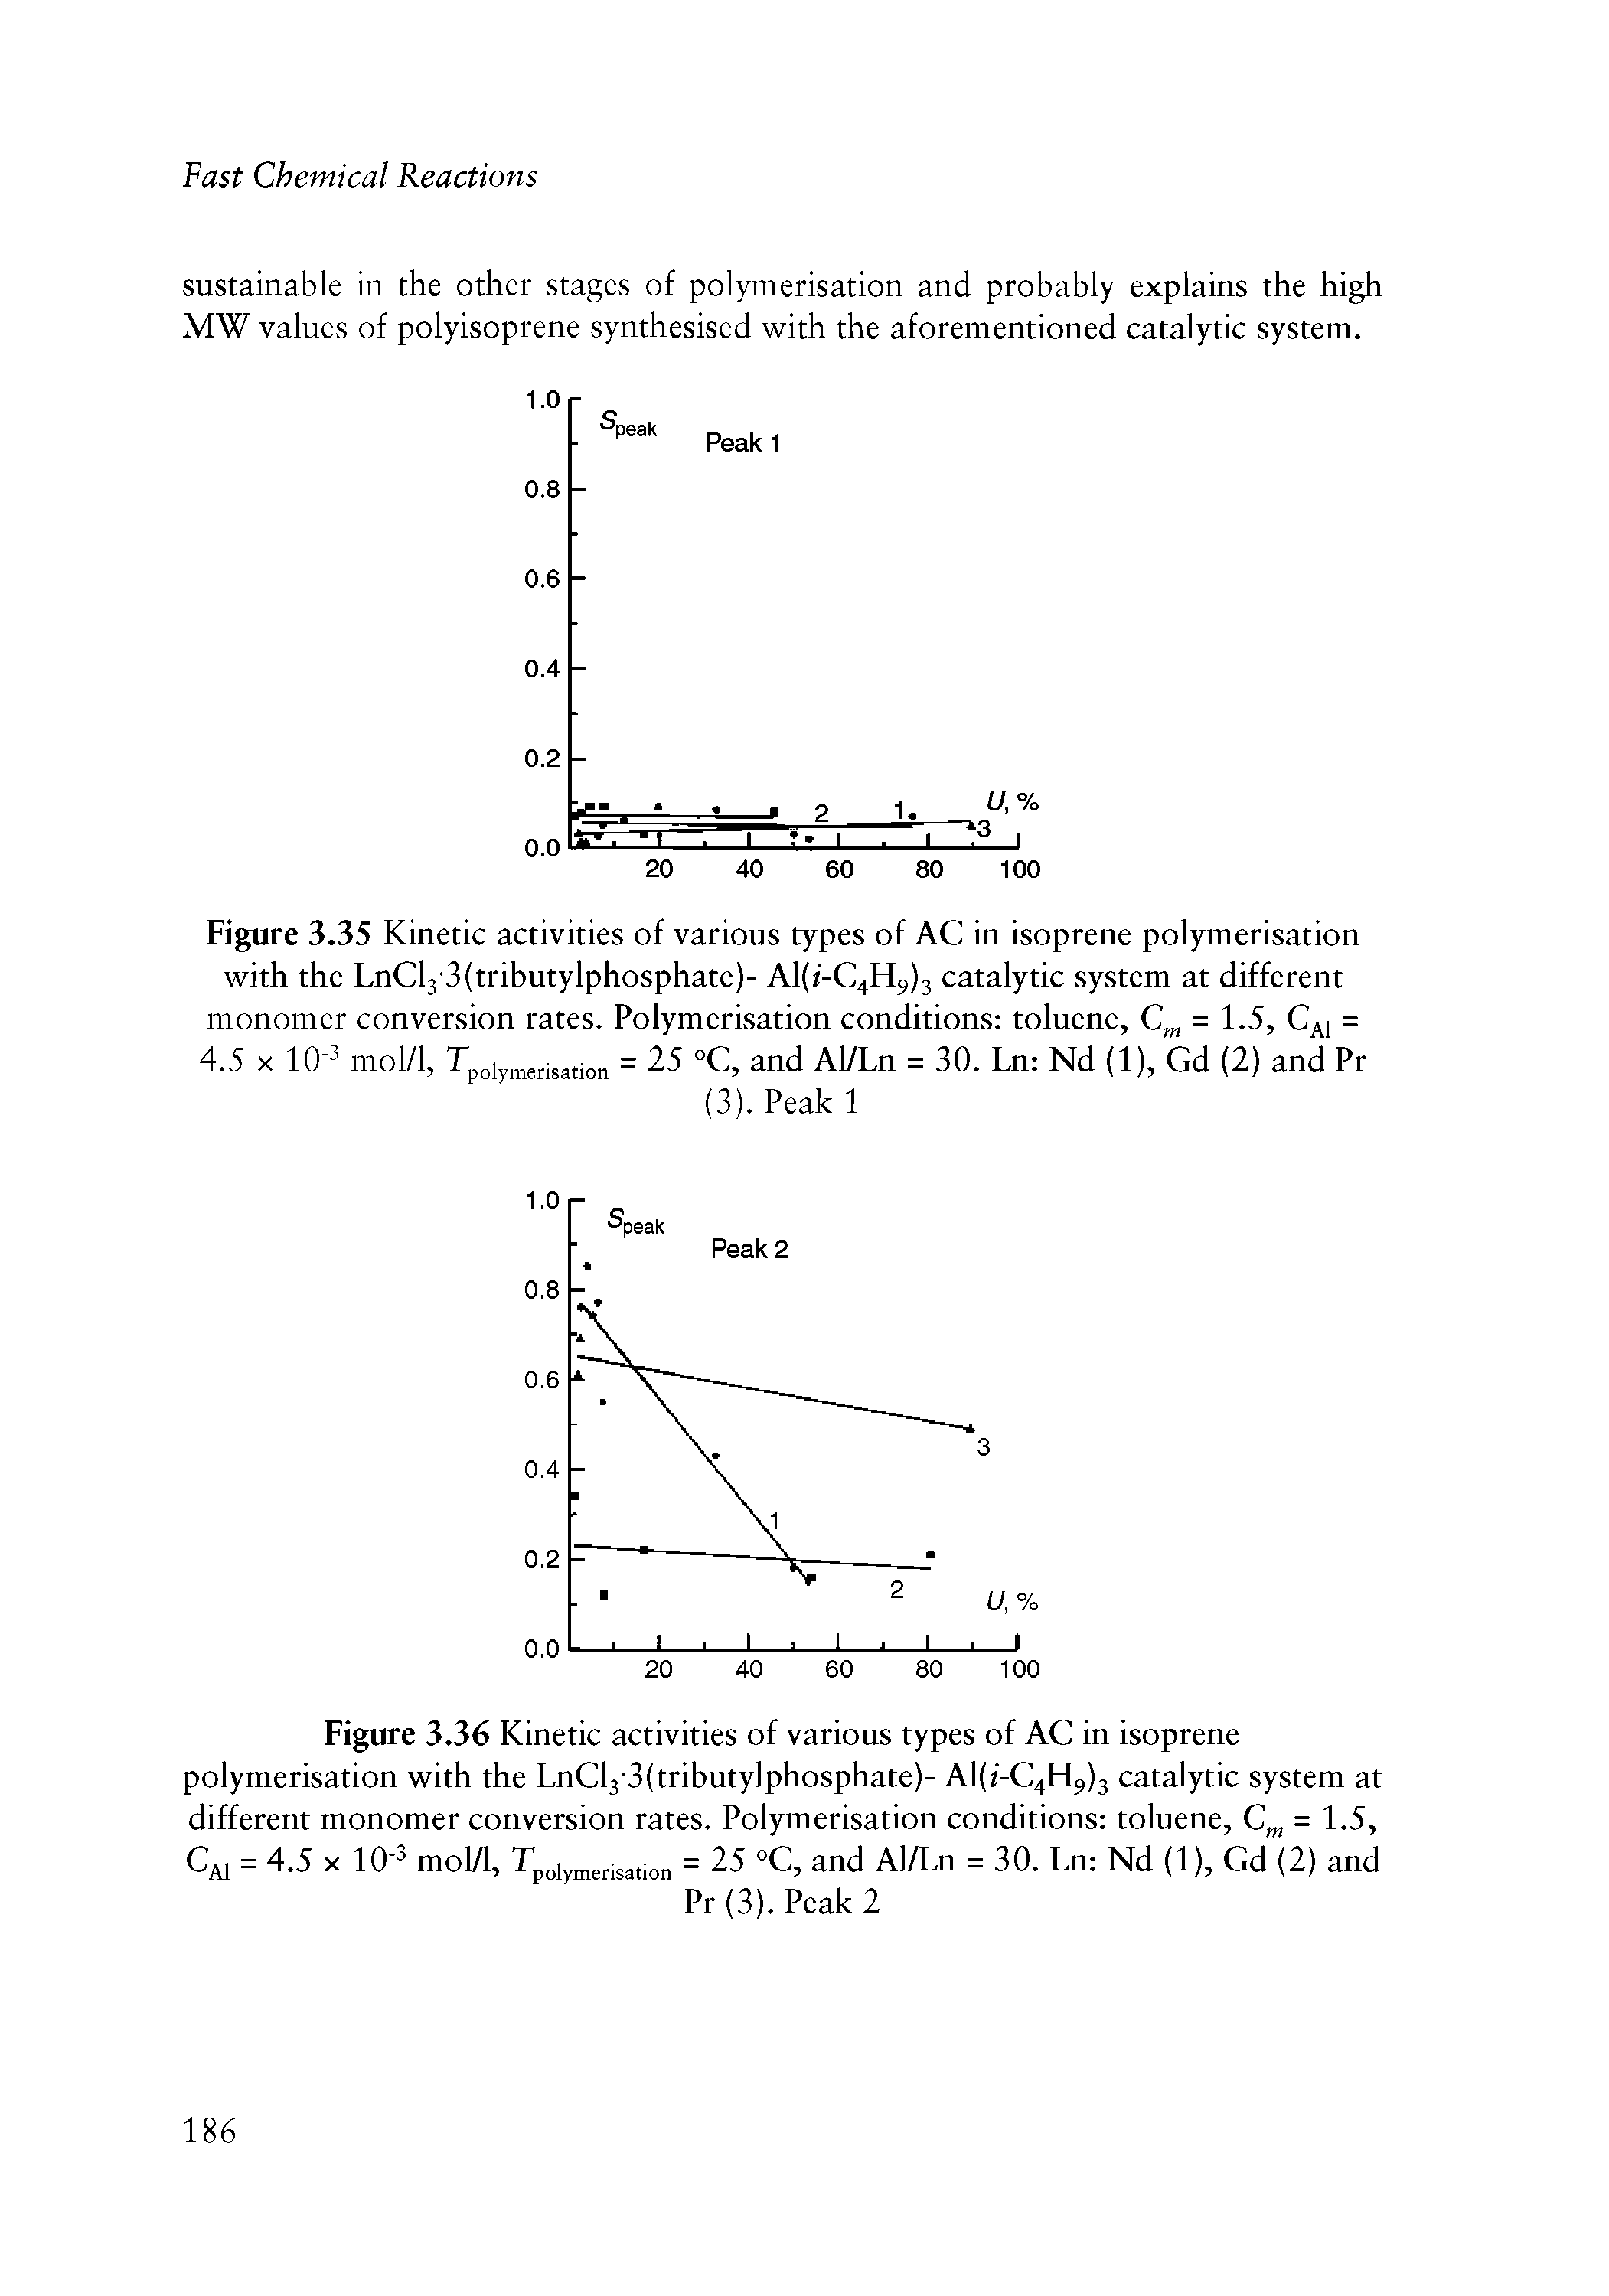 Figure 3.35 Kinetic activities of various types of AC in isoprene polymerisation with the LnCl3-3(tributylphosphate)- A1(/-C4H9)3 catalytic system at different monomer conversion rates. Polymerisation conditions tolnene, = 1.5, C i = 4.5 X 10 mol/1, = 25 °C, and Al/Ln = 30. Ln Nd (1), Gd (2) and Pr...